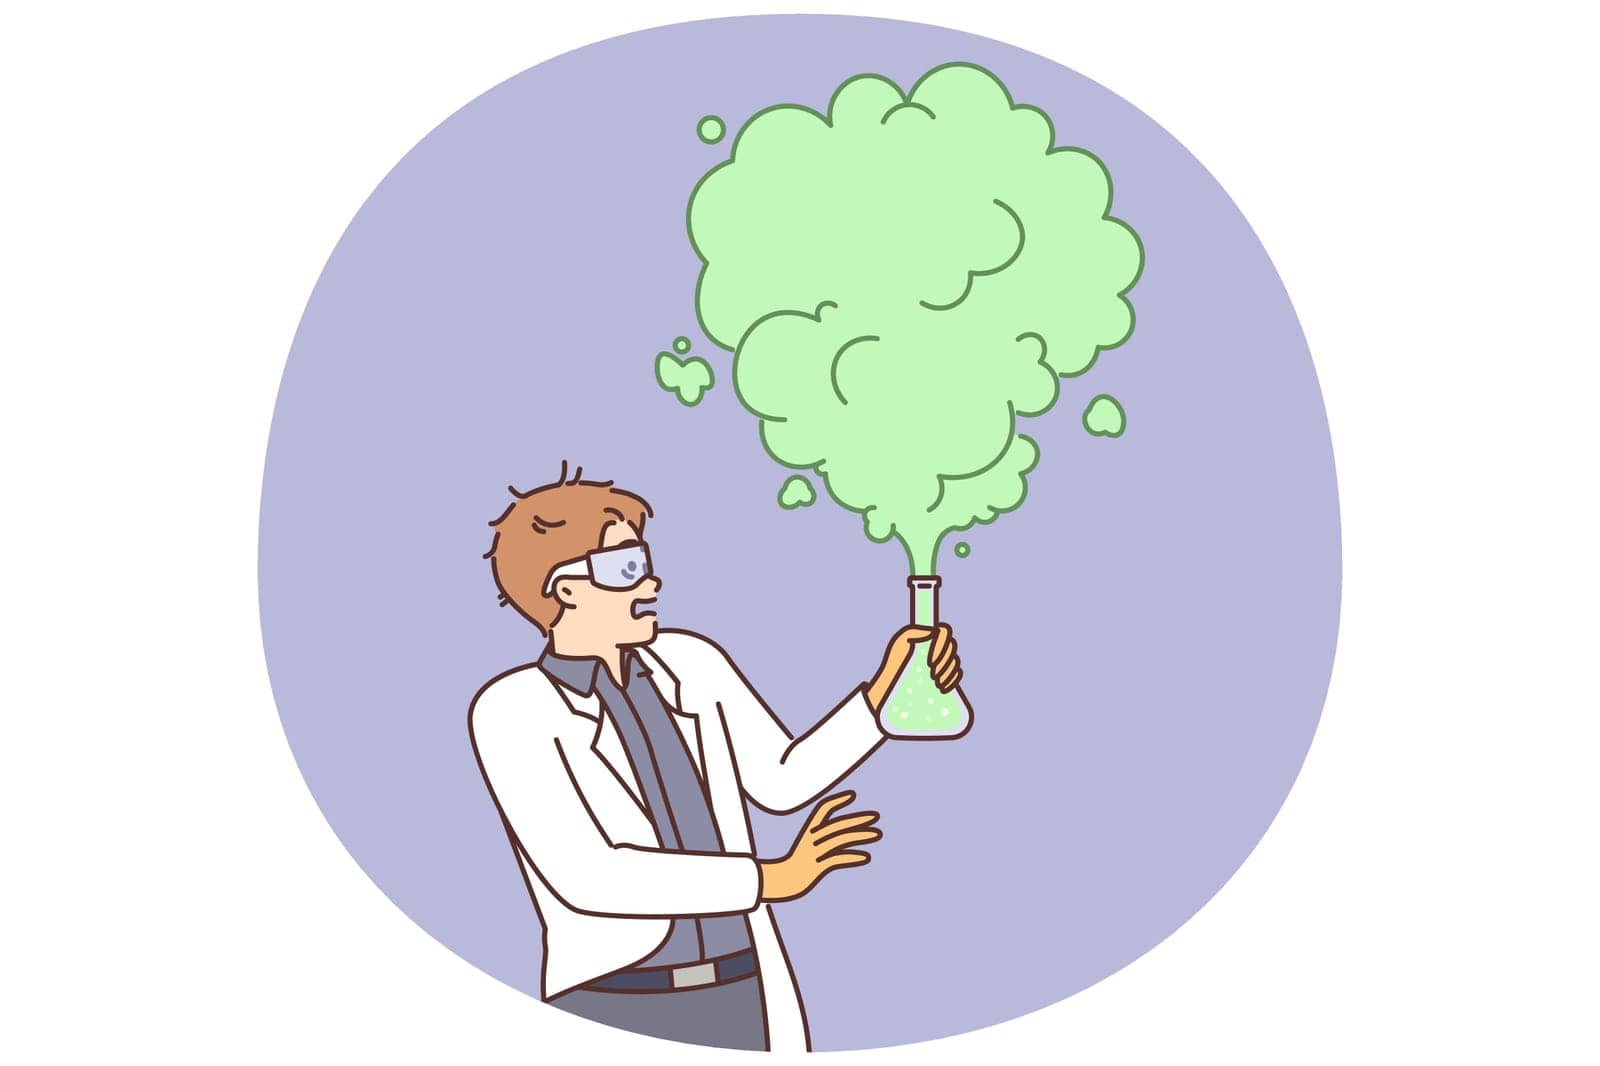 Mad scientist conducts dangerous chemistry experiment with reagents and fails due to explosive chemical reaction. Man in white coat working in chemical laboratory is shocked to see green smoke